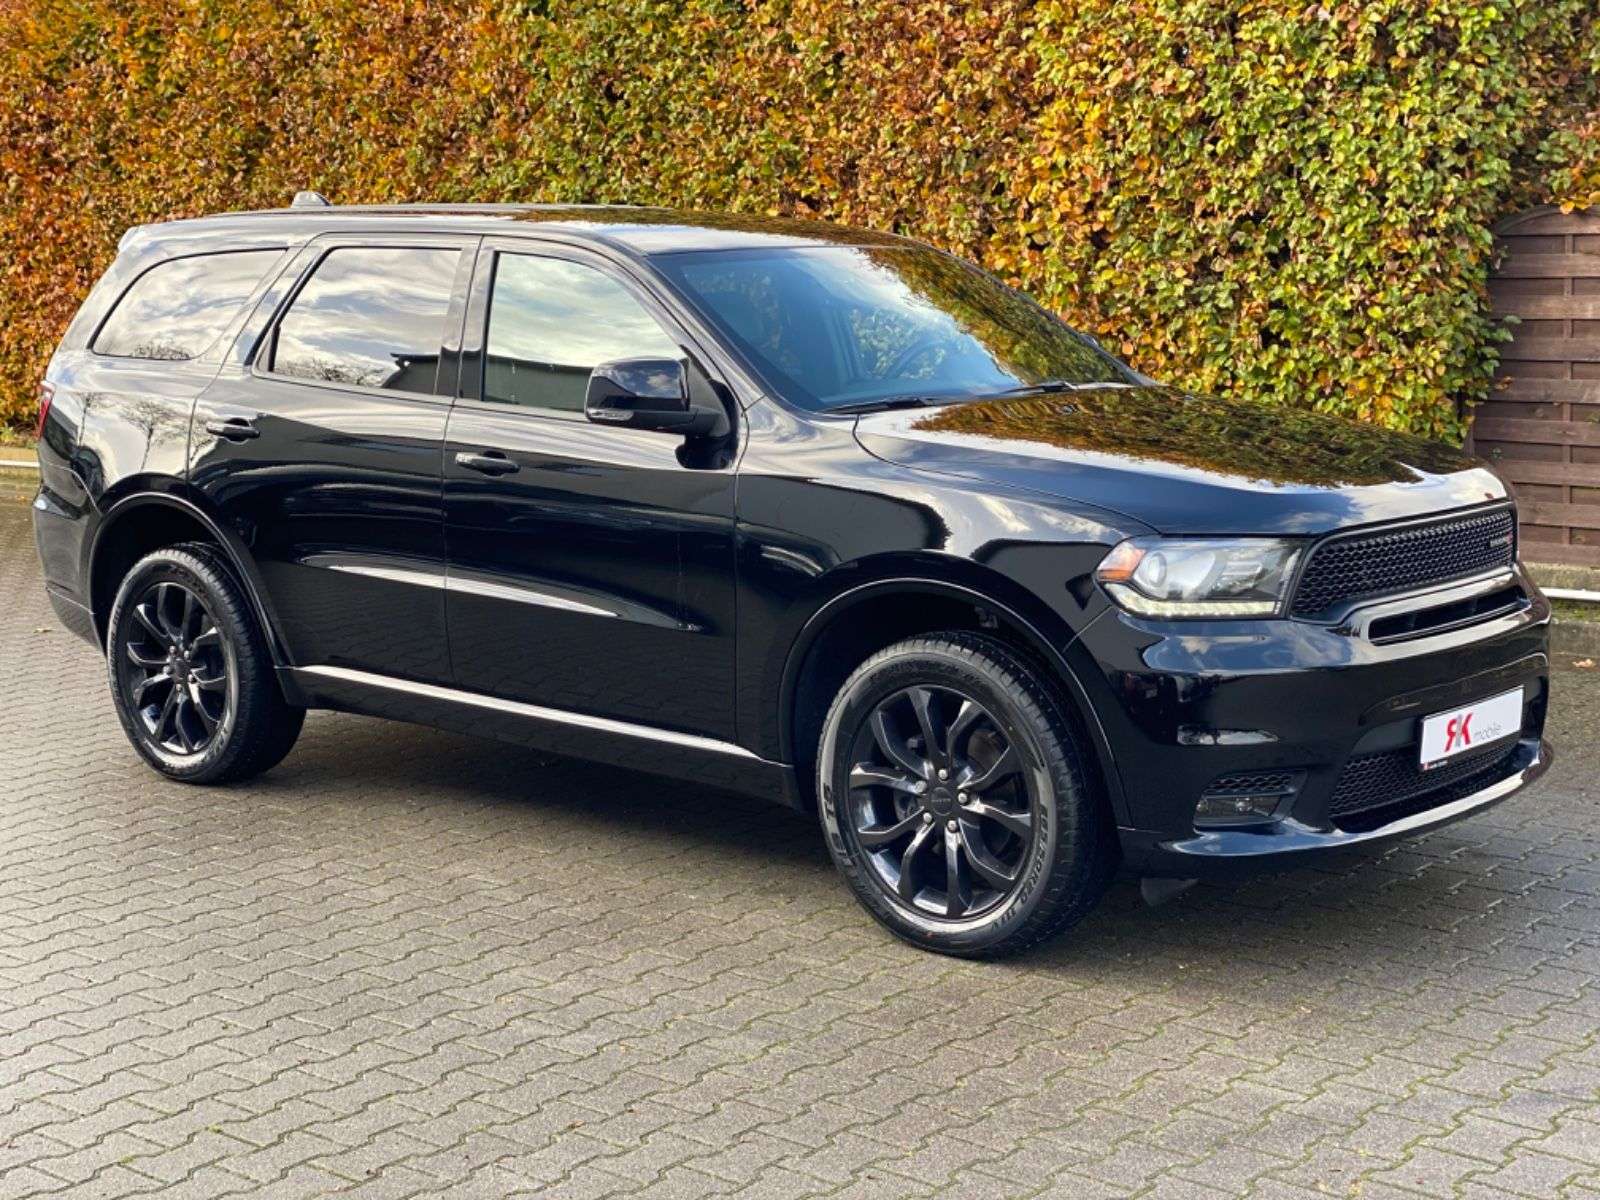 Dodge Durango Off-Road/Pick-up in Black used in Syke for € 32,900.-